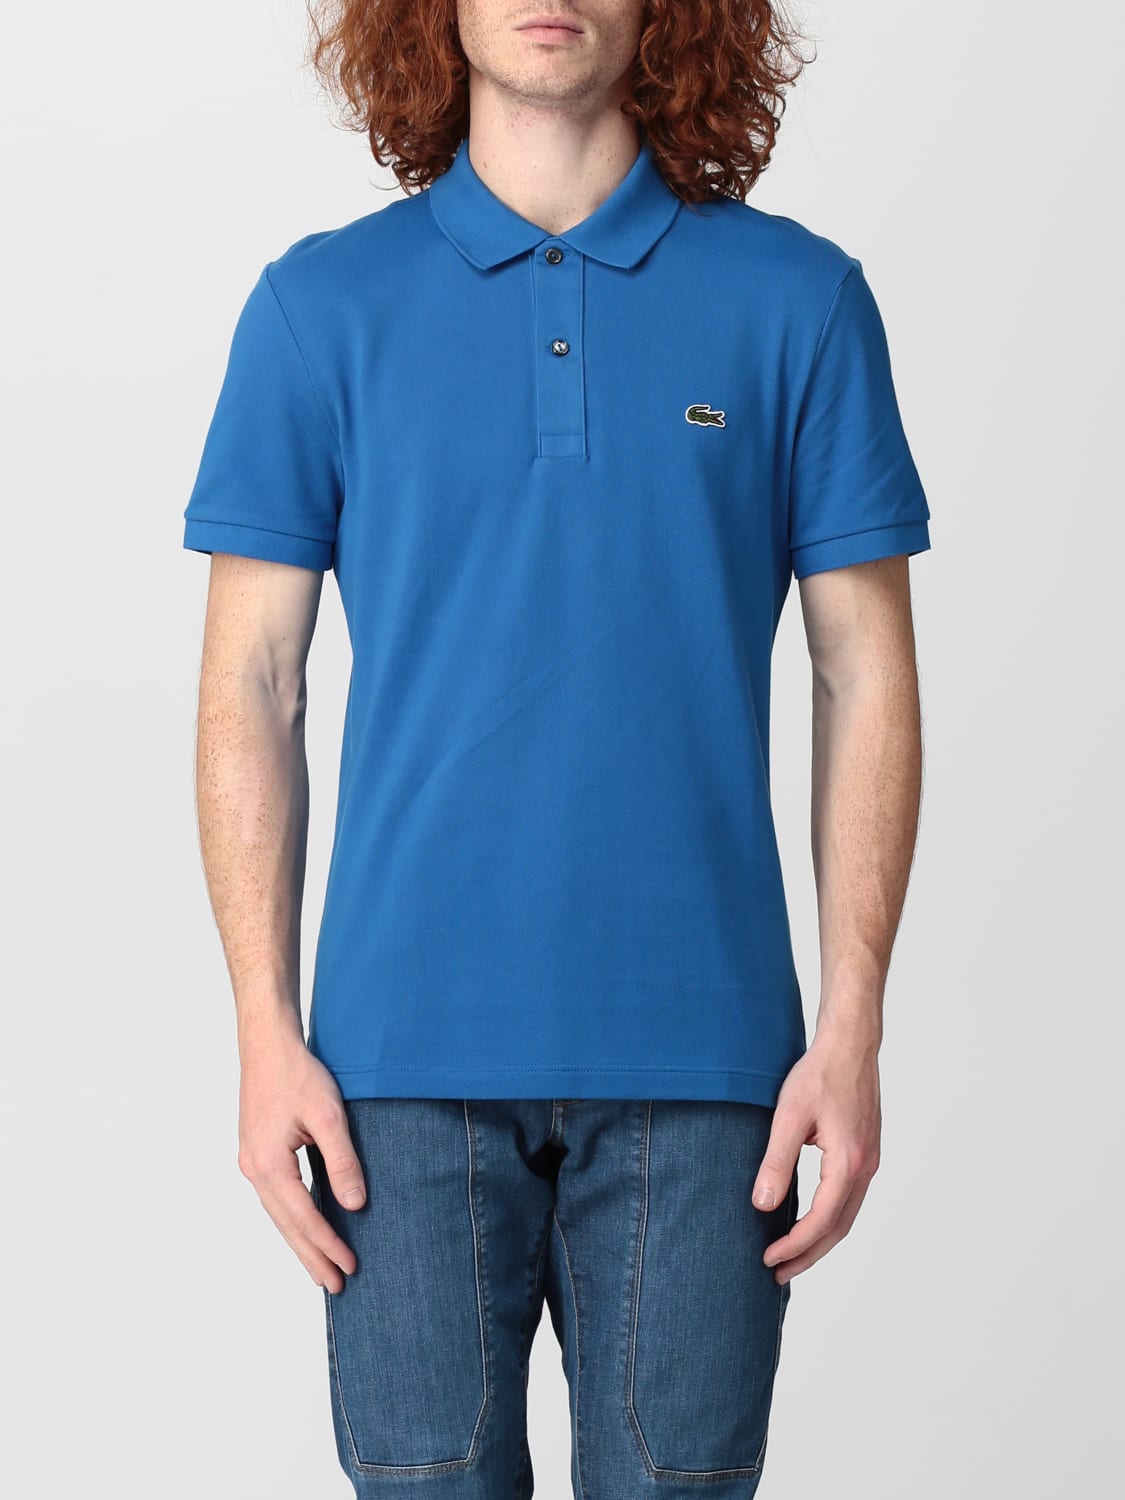 Skriv email Zoologisk have Fødested LACOSTE: polo shirt for man - Avion | Lacoste polo shirt PH4012 online on  GIGLIO.COM